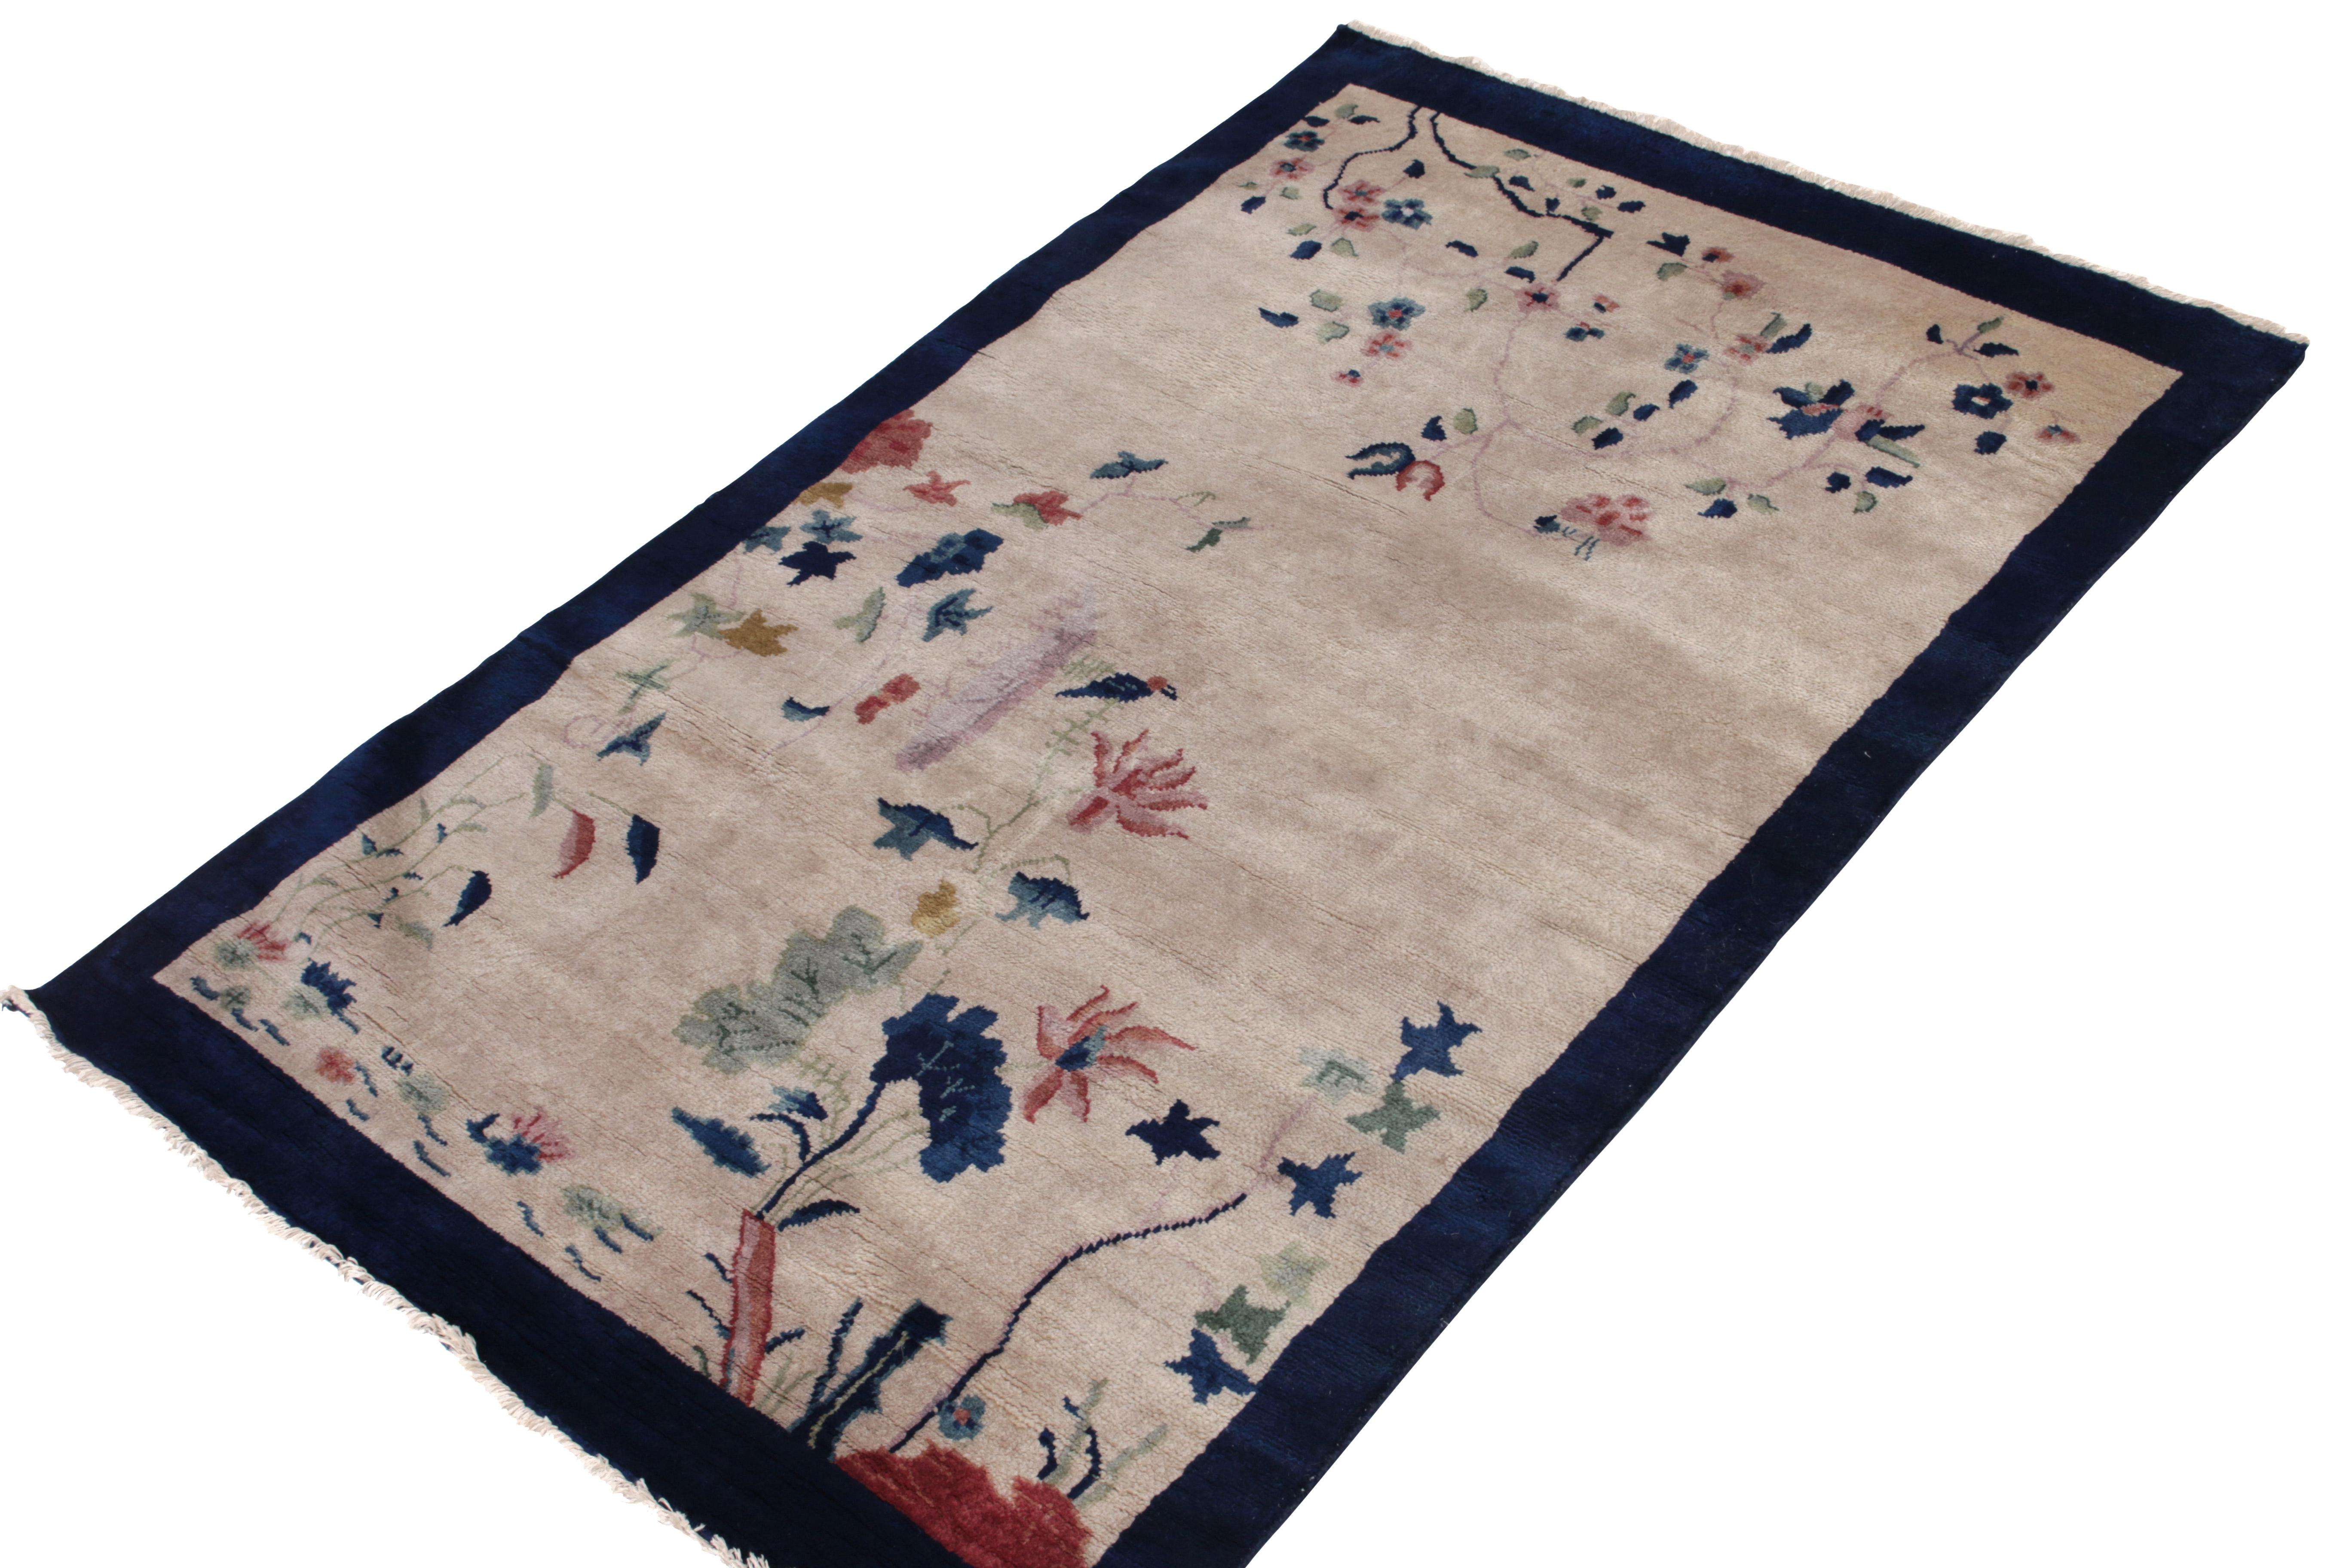 Art Deco Vintage Chinese Deco Style Rug in Blue Border, & Floral Patterns by Rug & Kilim